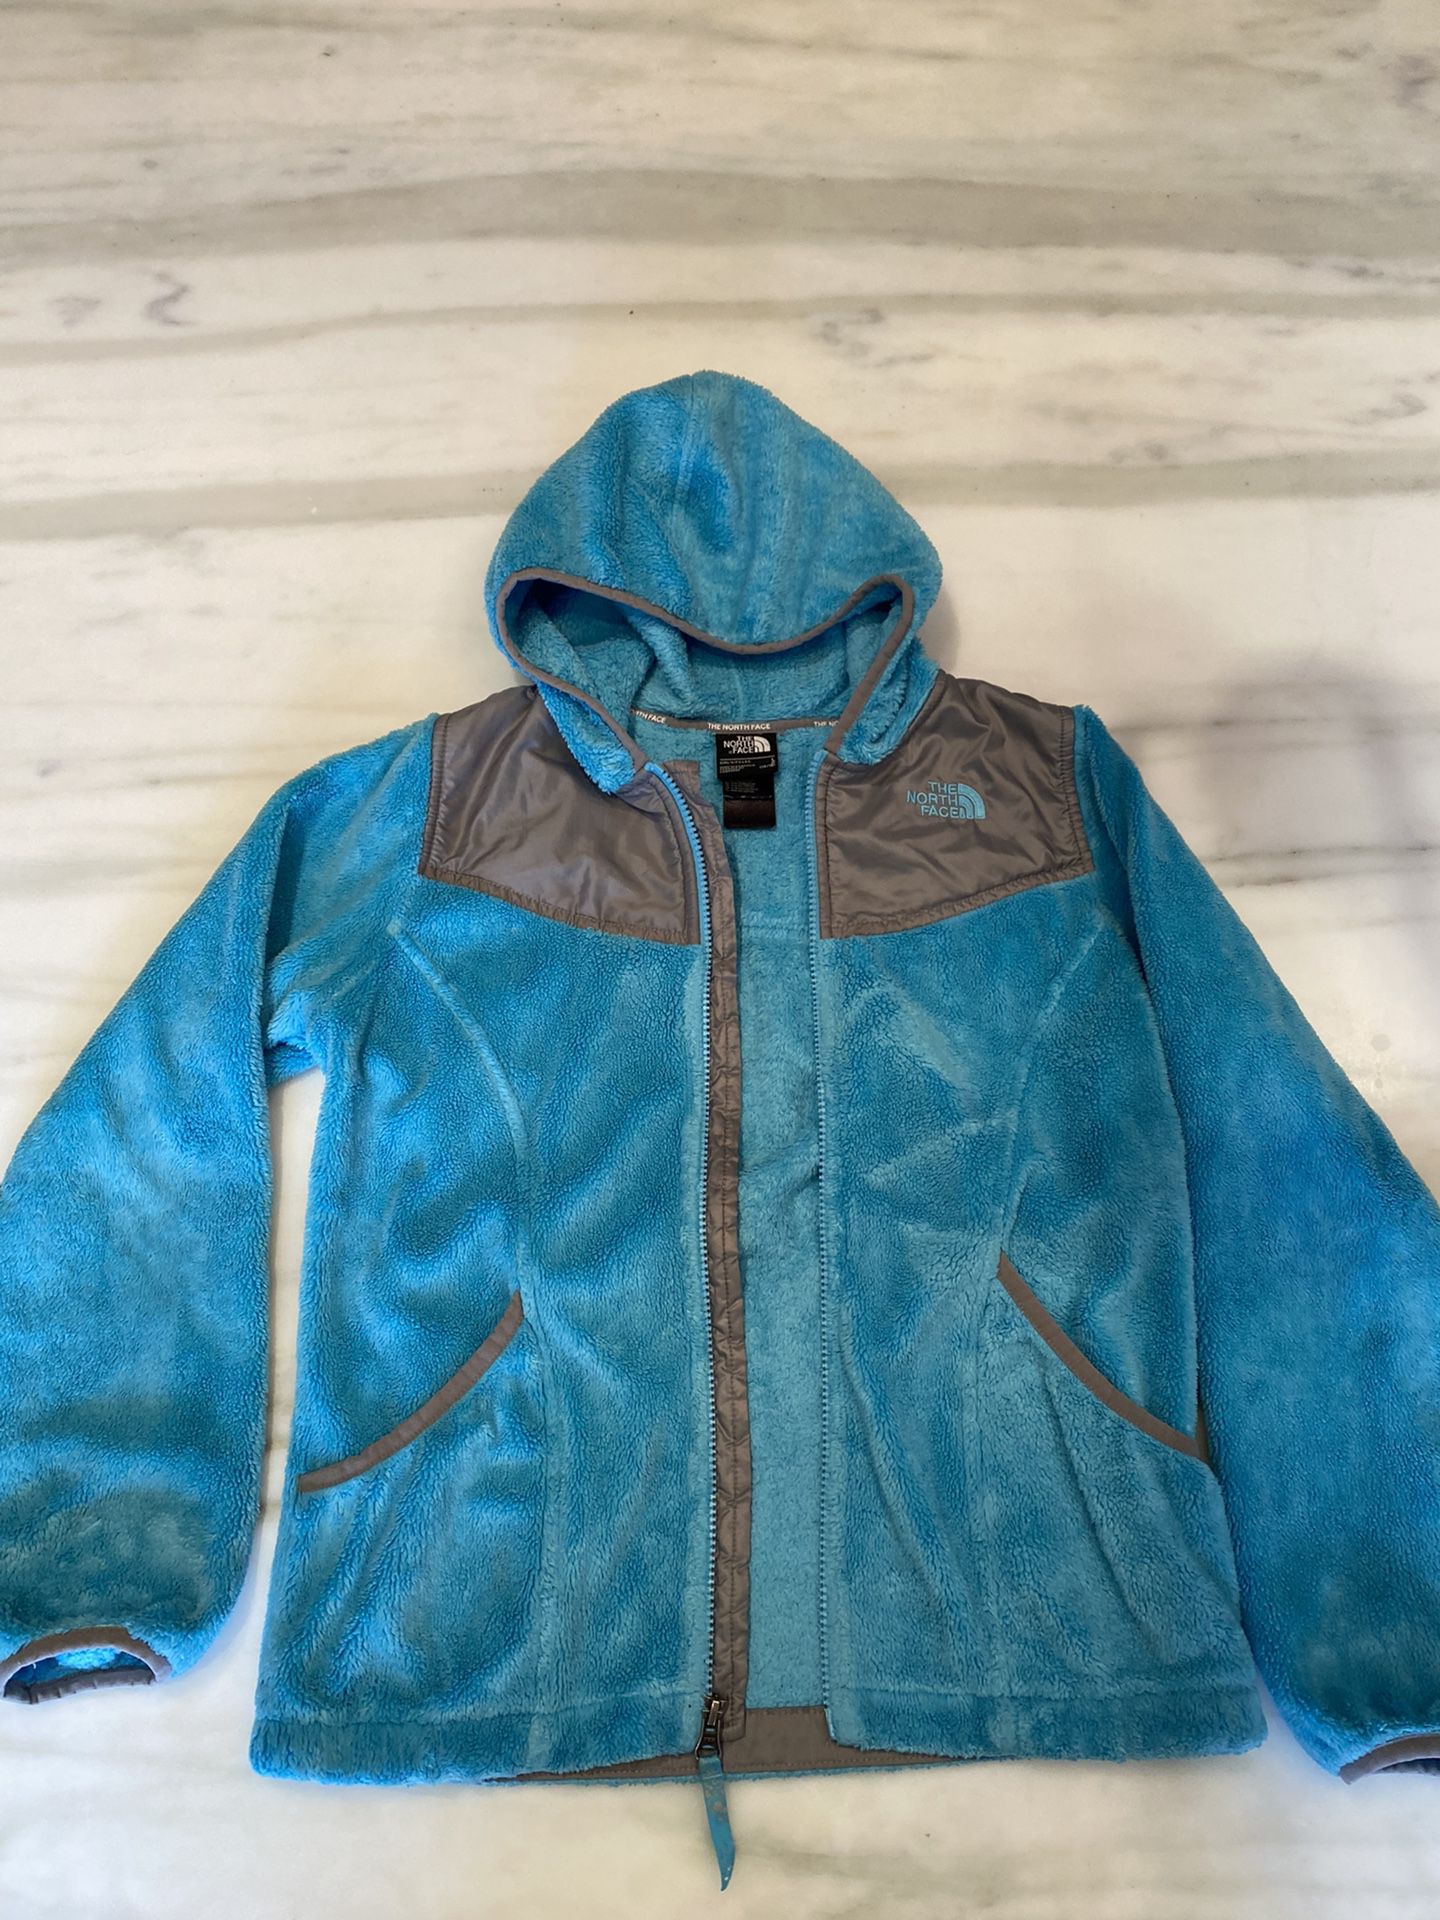 North Face Youth Fleece Jacket Size l (14/16)